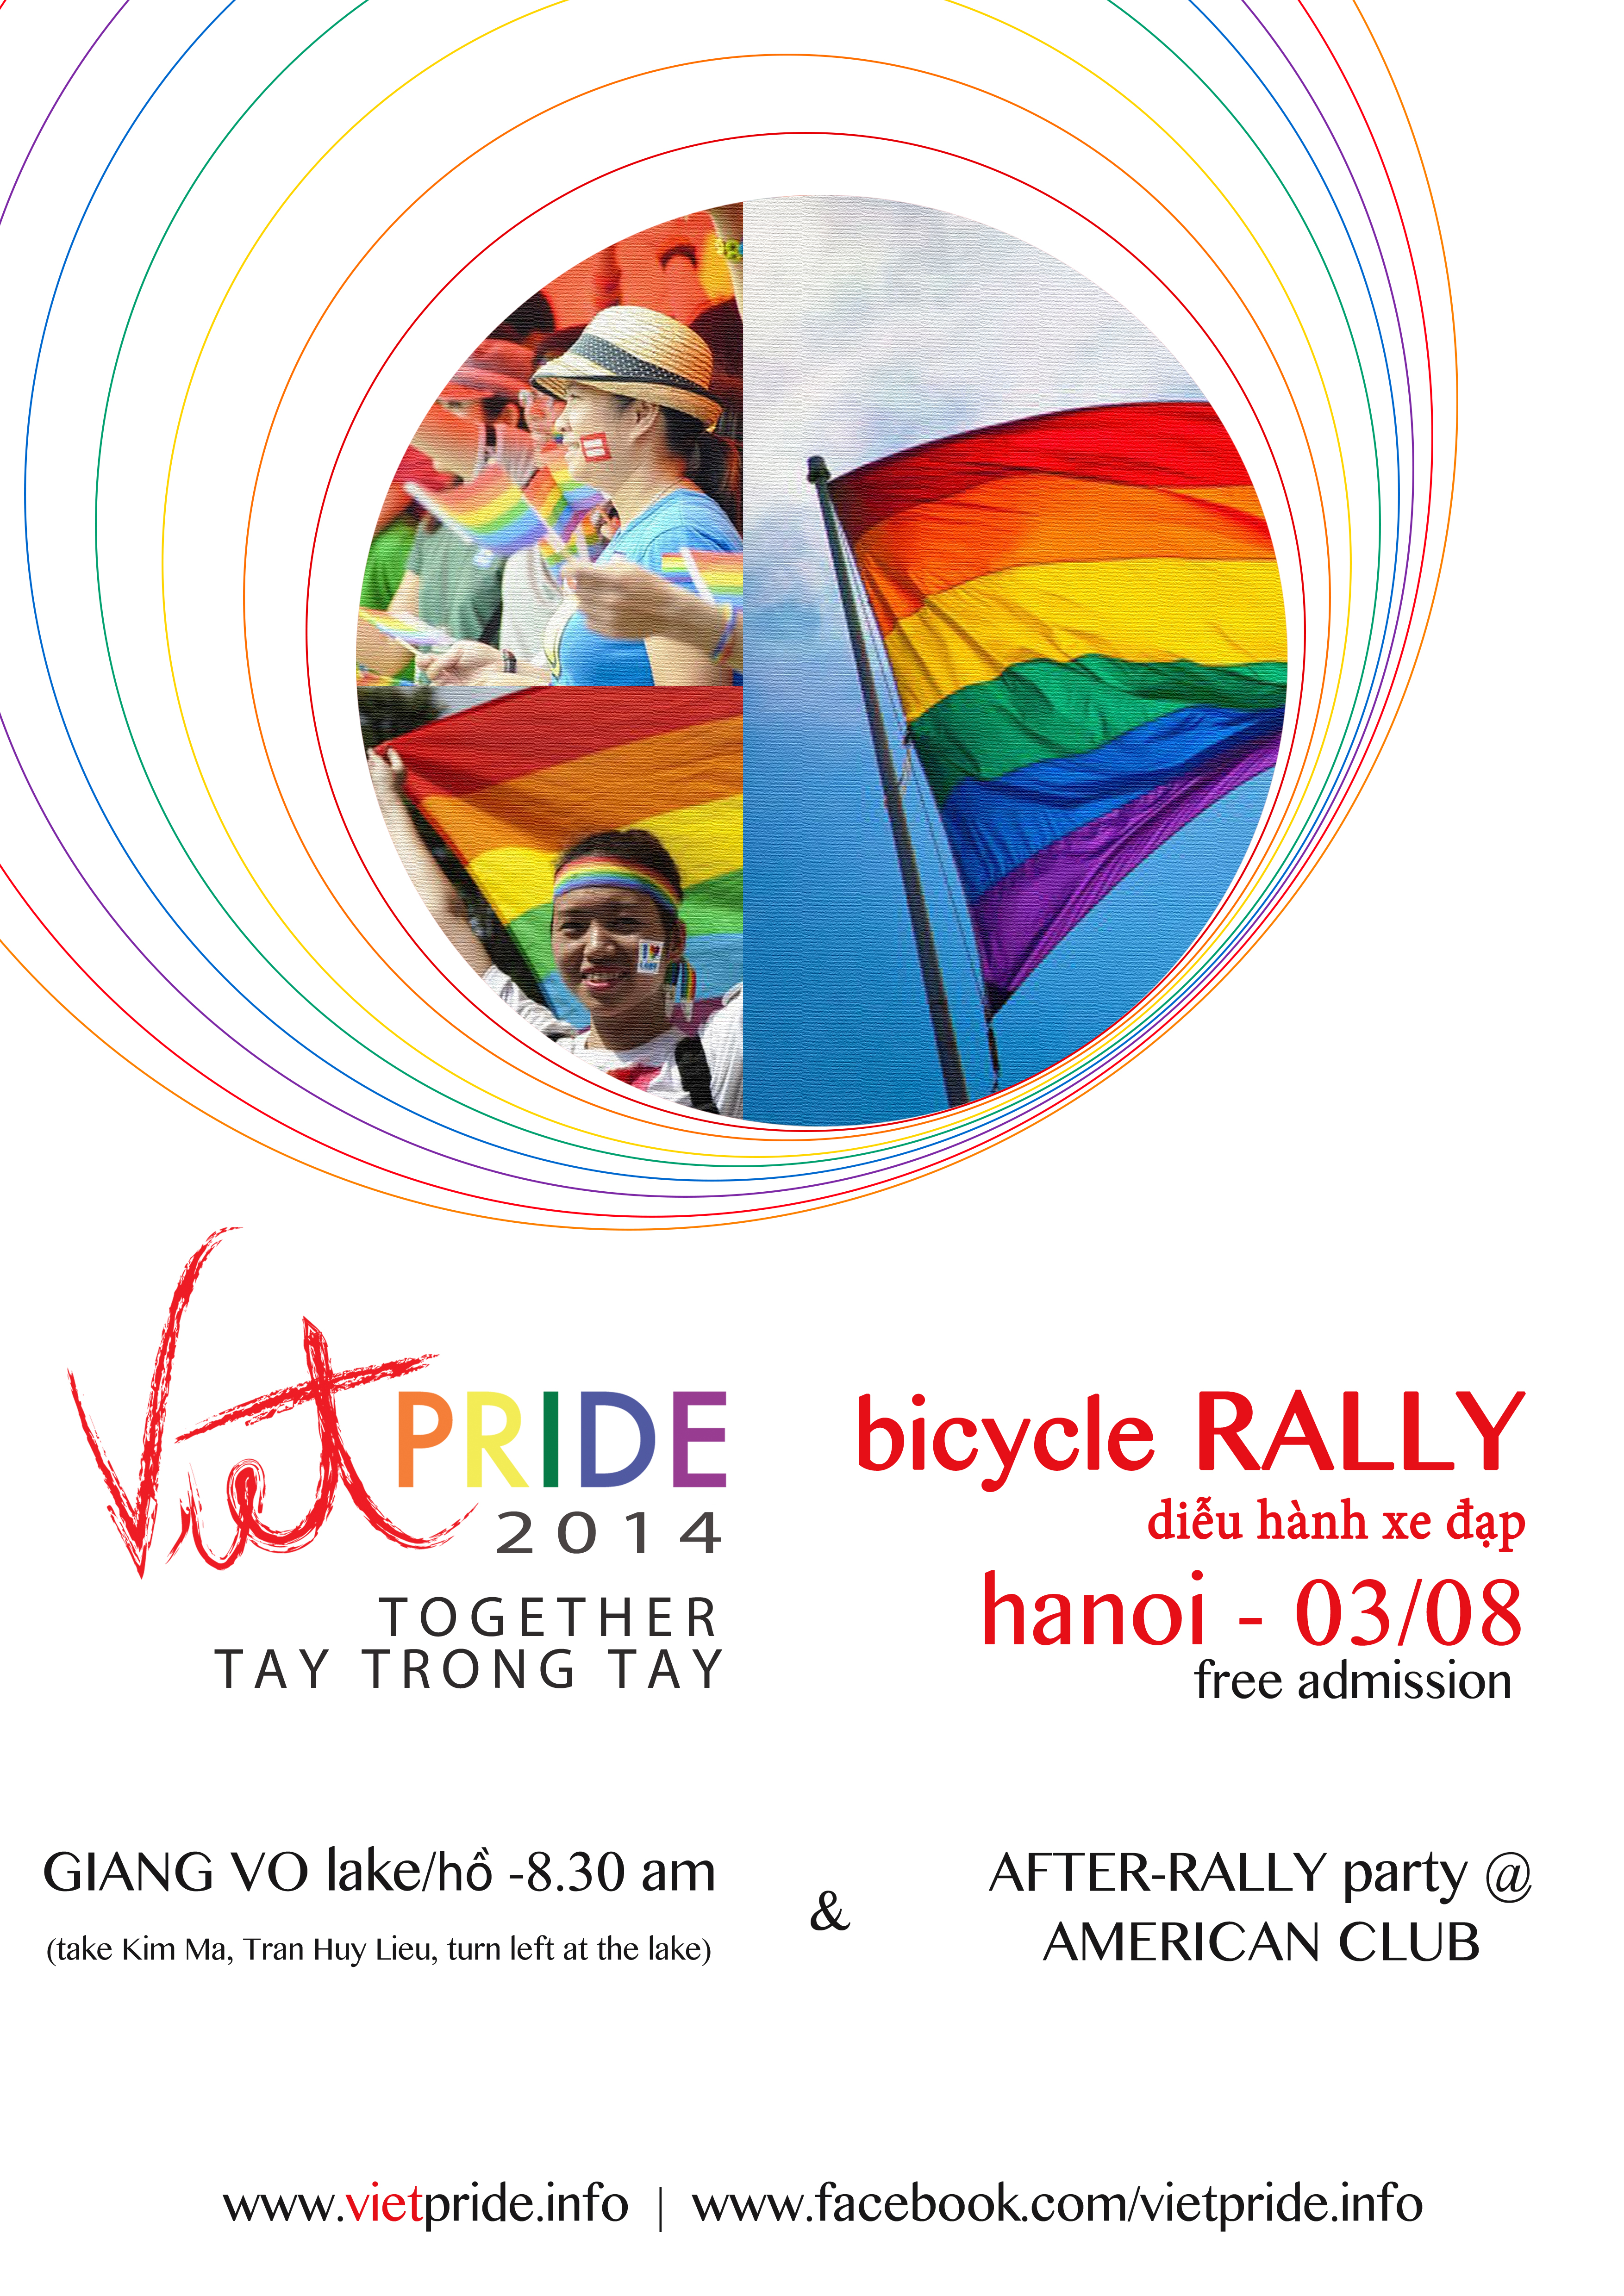 Event for Vietnam’s LGBT community to take place in August